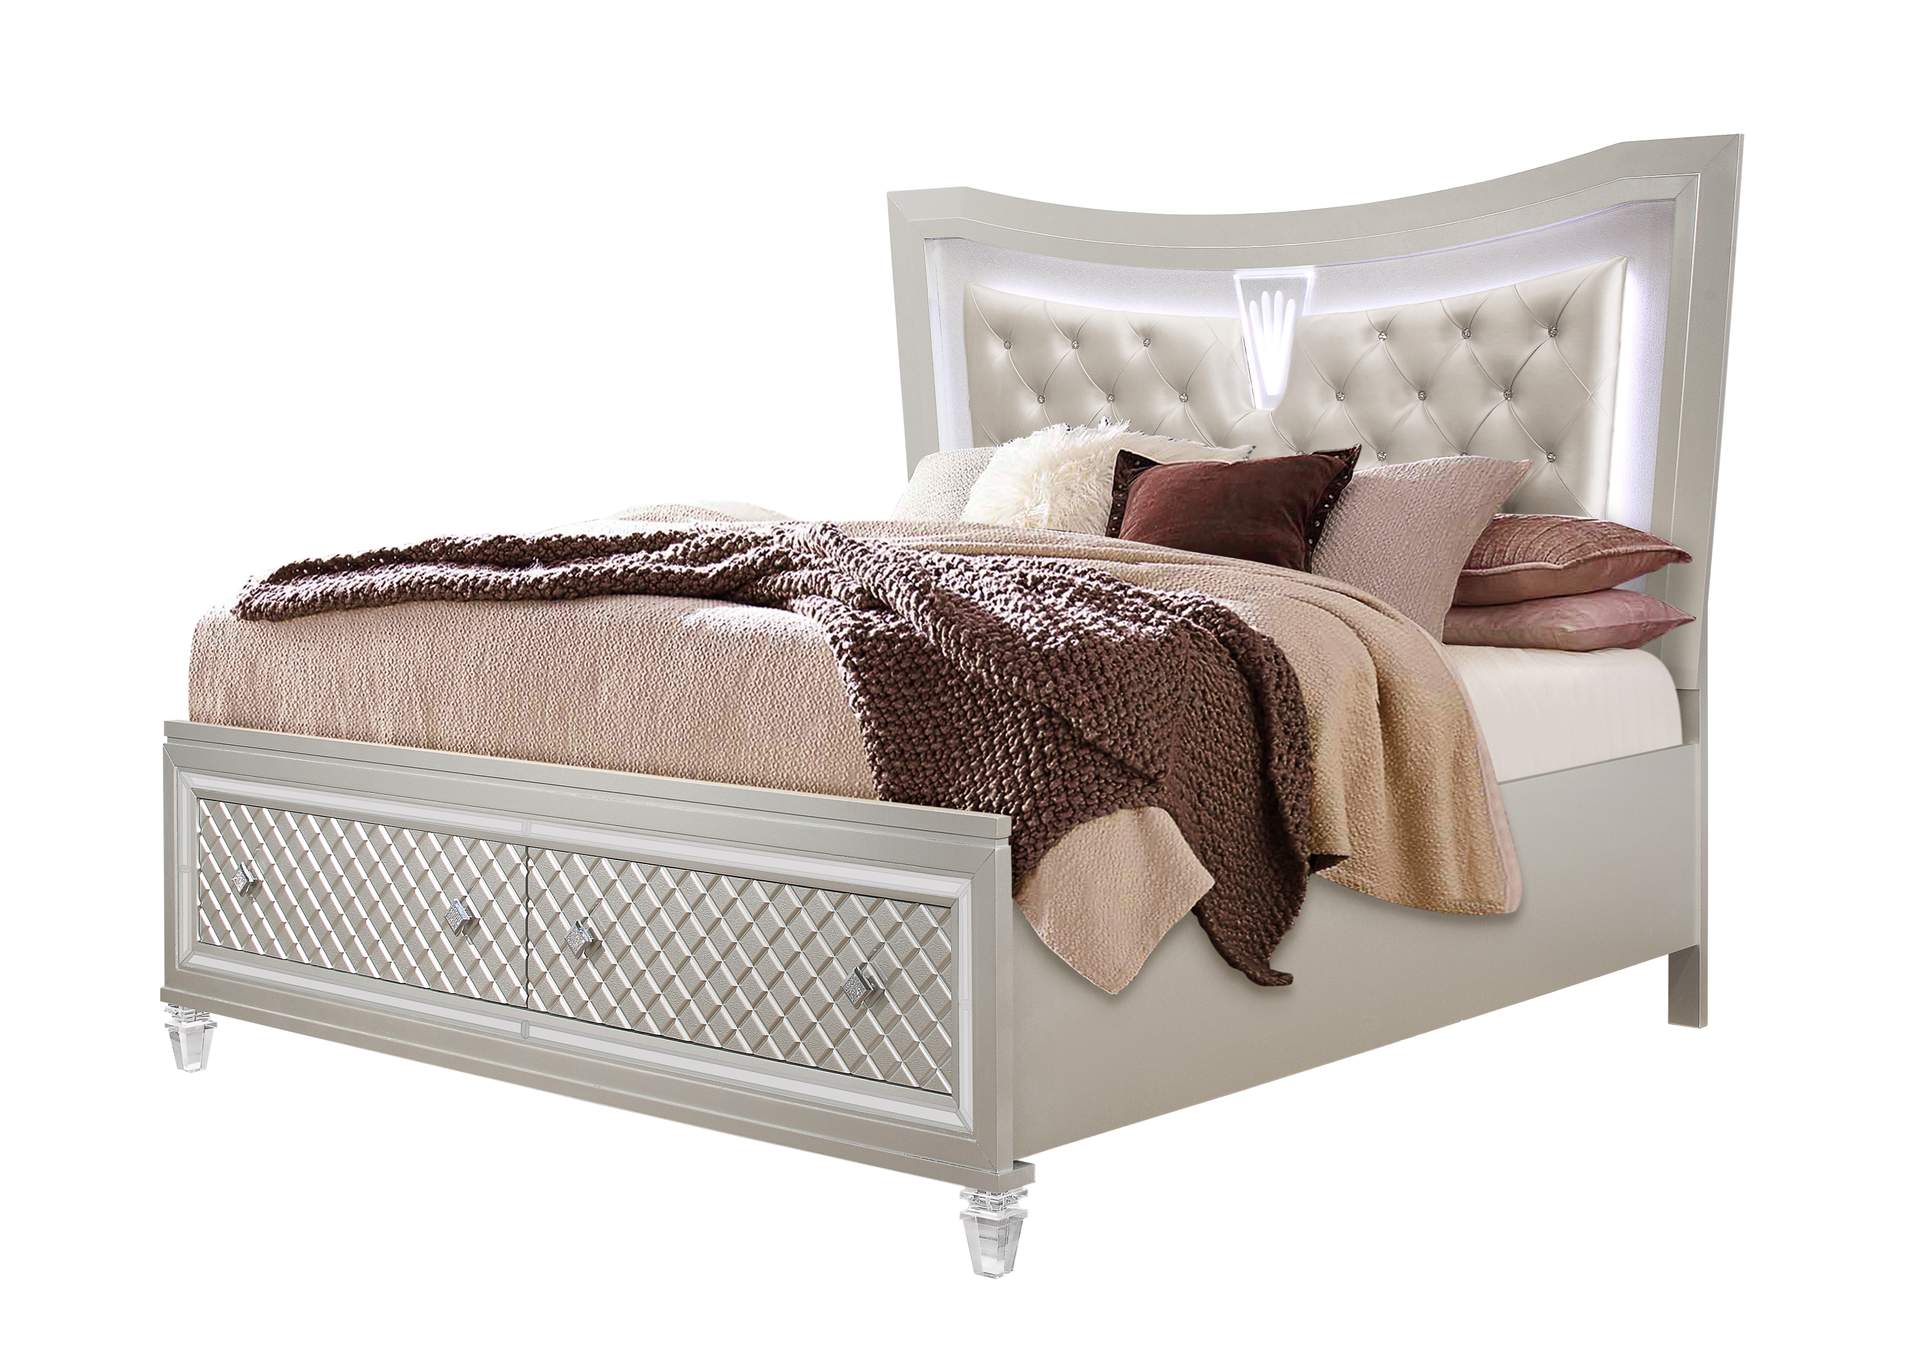 Champagne Paris Queen Bed,Global Furniture USA